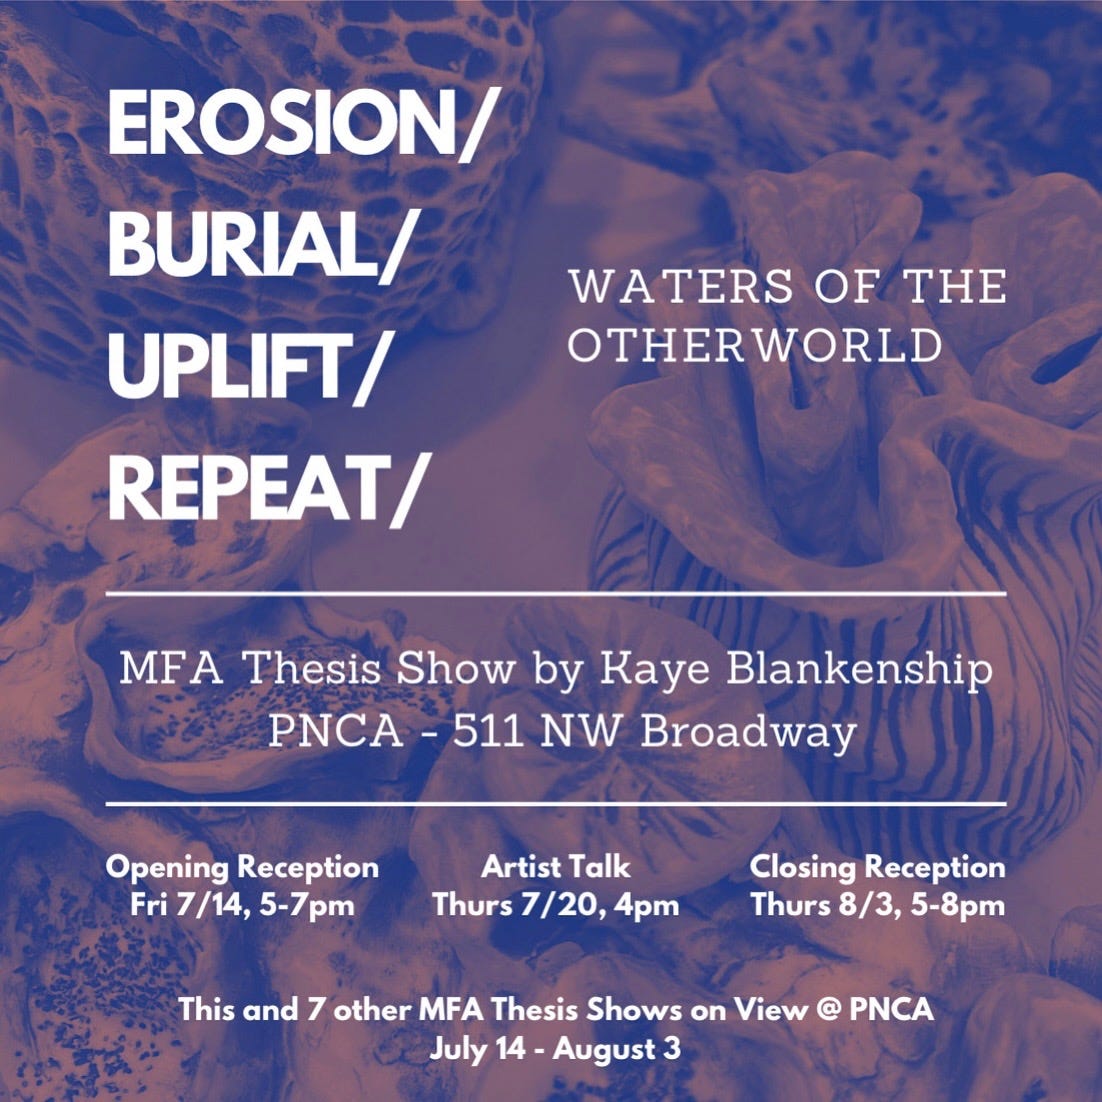 Flyer for EROSION/BURIAL/UPLIFT/REPEAT, with exhibition details in white text against a duotone background photo that's a close-up of a variety of abstracted ceramic creatures by Kaye Blankenship. Exhibition details are in the text that follows this image. 